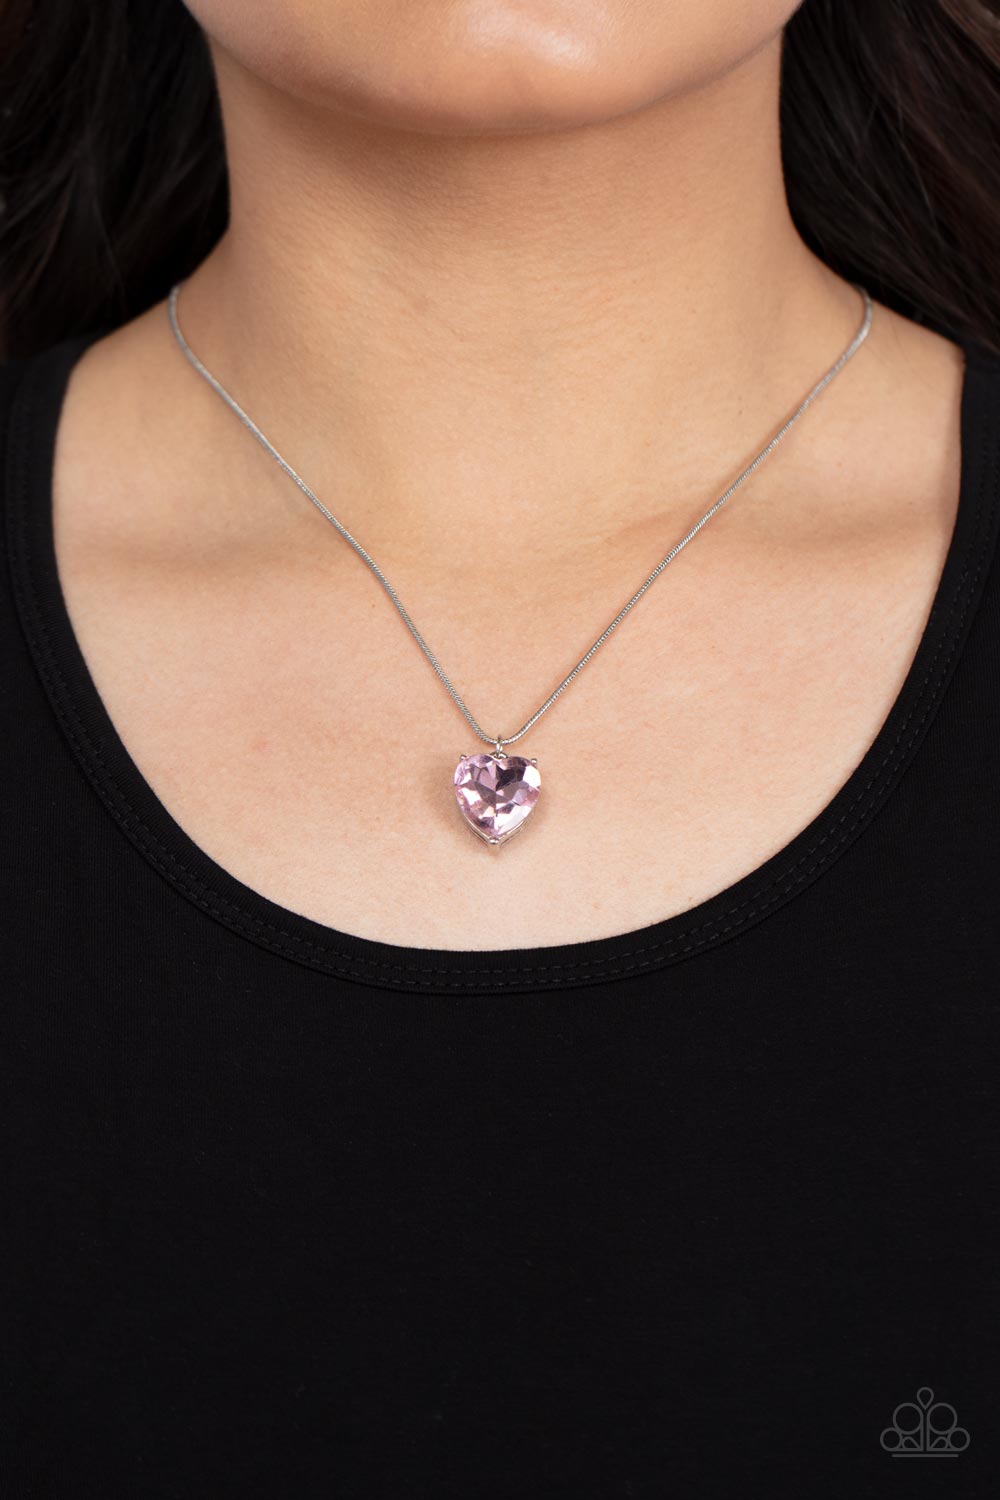 Smitten with Style Pink Rhinestone Heart Necklace - Paparazzi Accessories- lightbox - CarasShop.com - $5 Jewelry by Cara Jewels